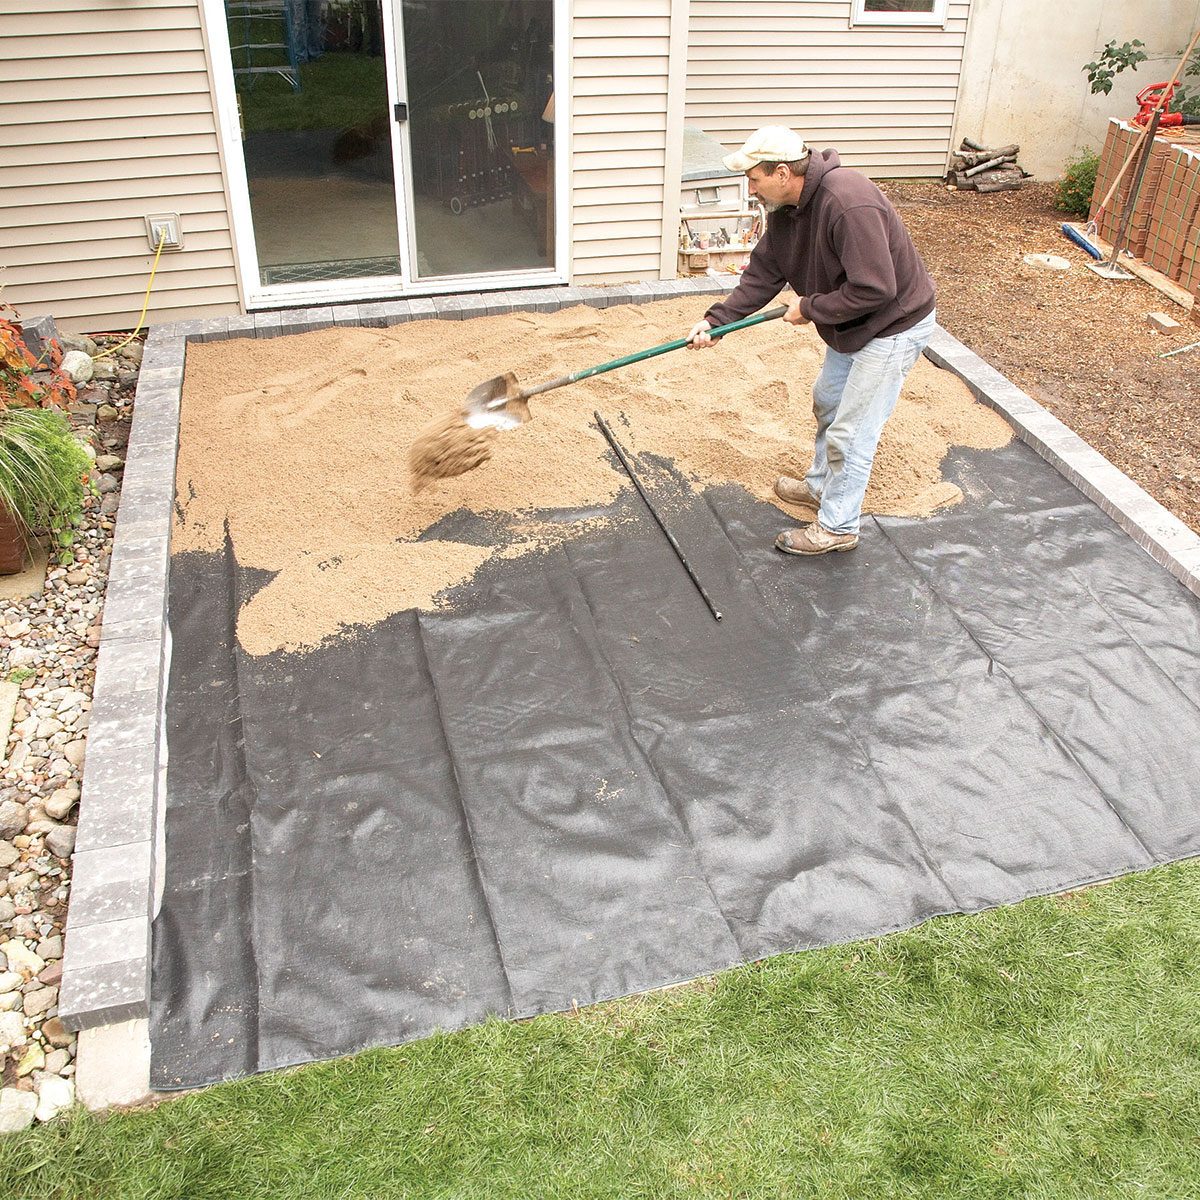 Spreading sand on layered down fabric 